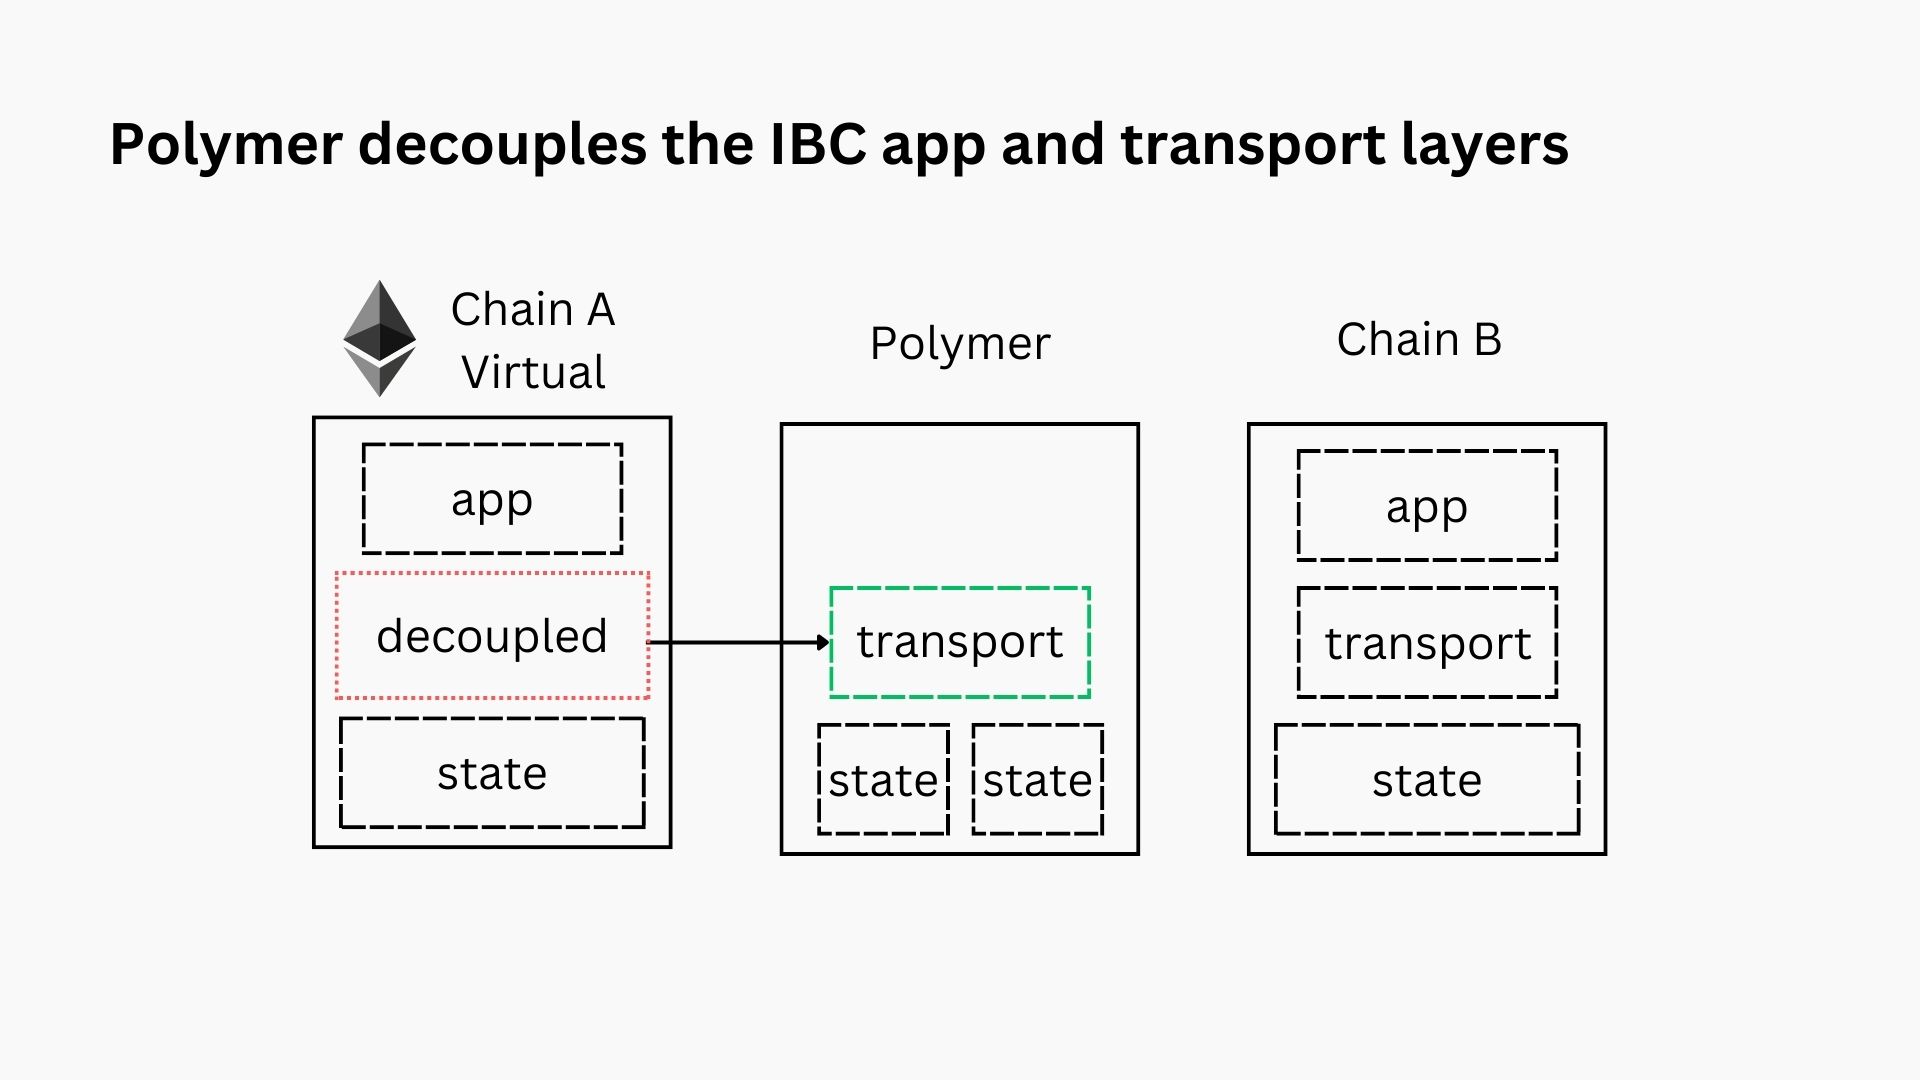 outsourcing the transport layer